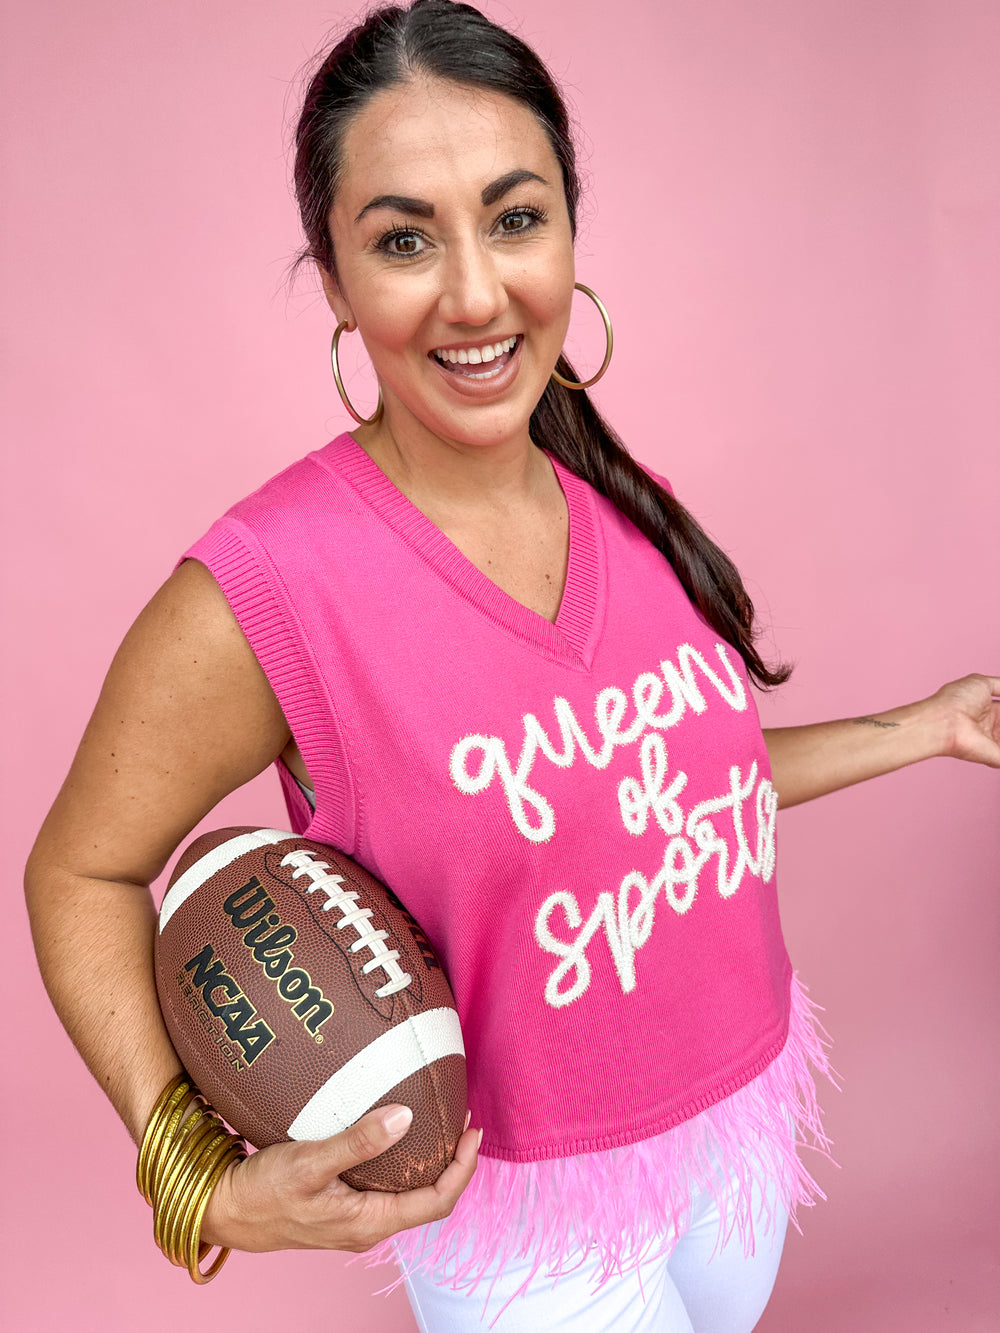 QUEEN OF SPARKLES | Queen of Sports Feather Sweater